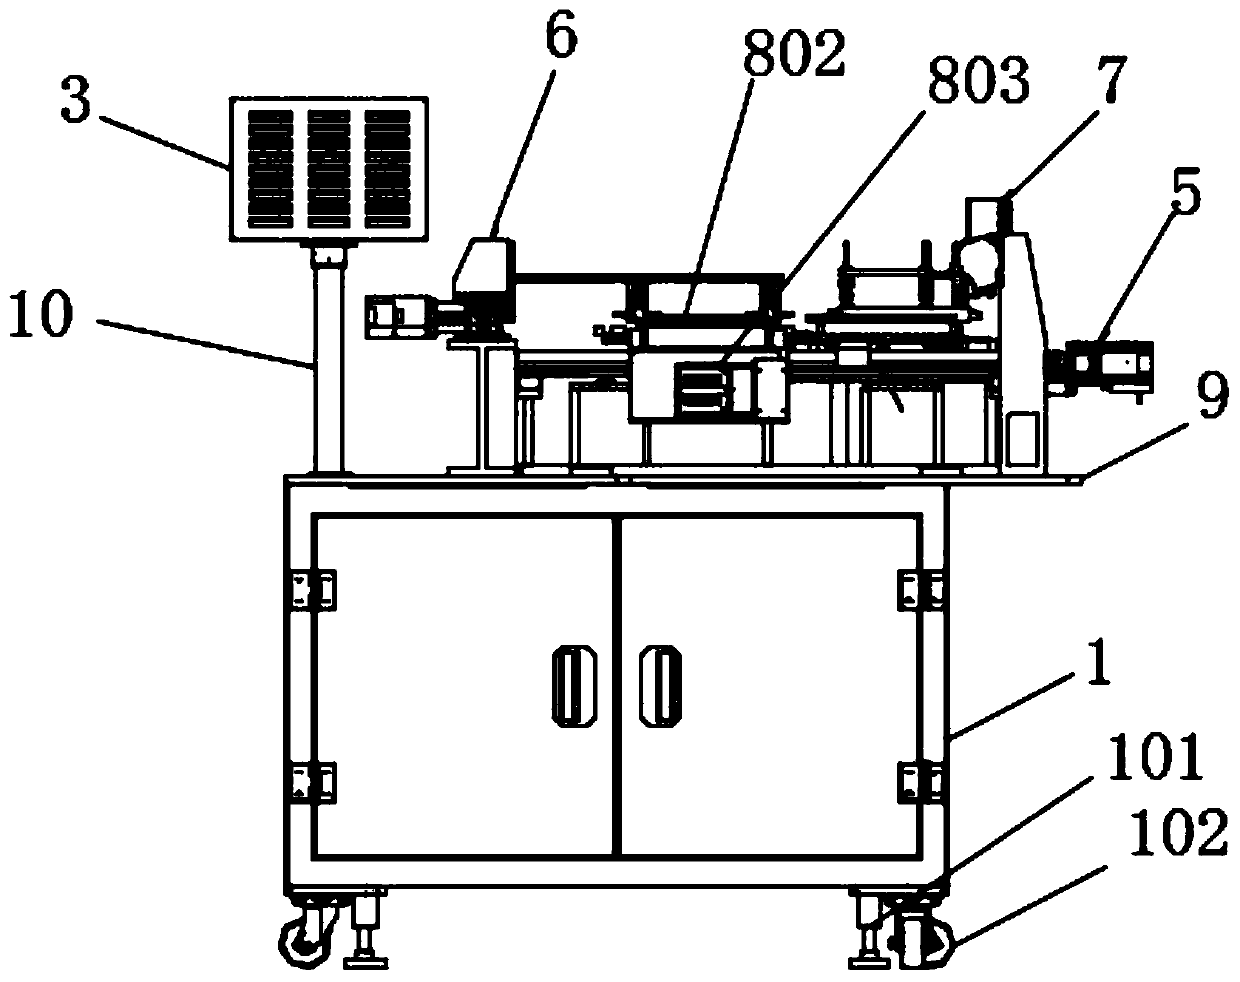 An integrated device for processing solar cell back sheet film